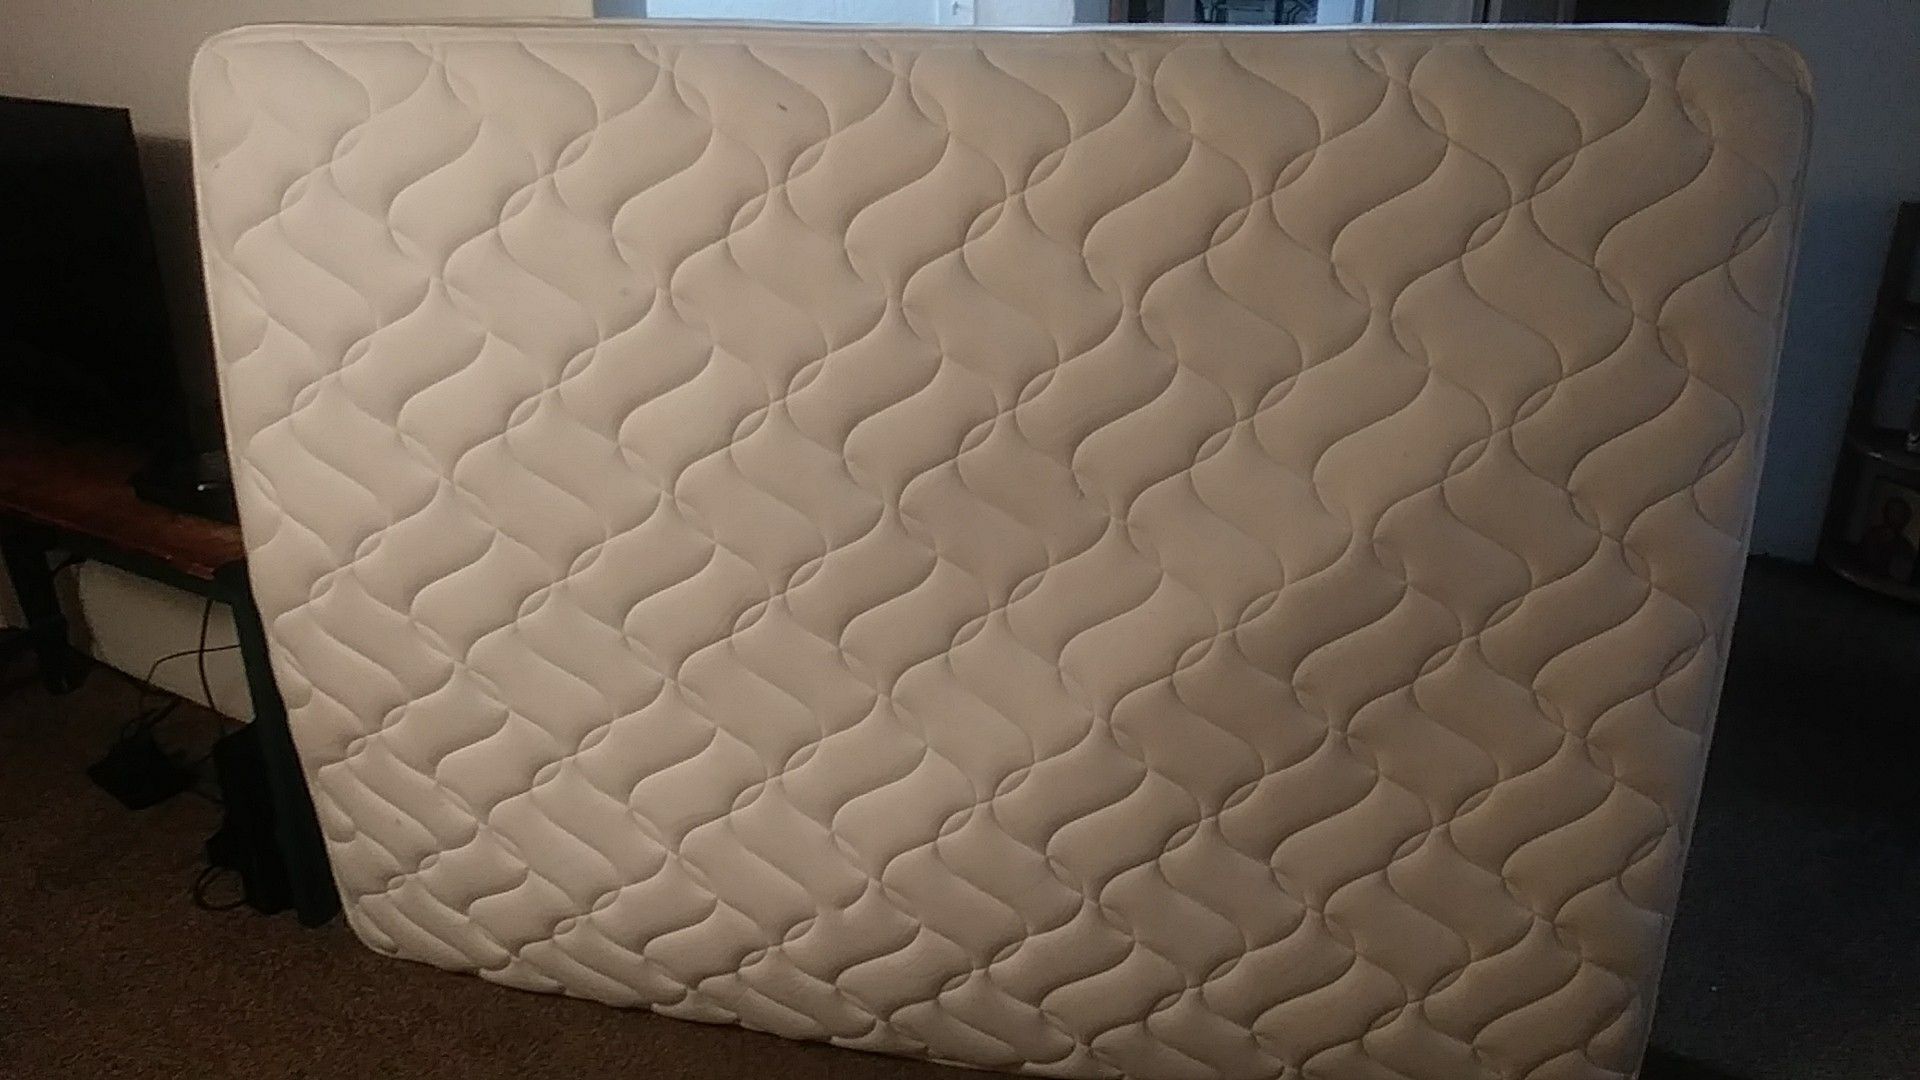 Fullsize mattress- 58 in by 75 inches